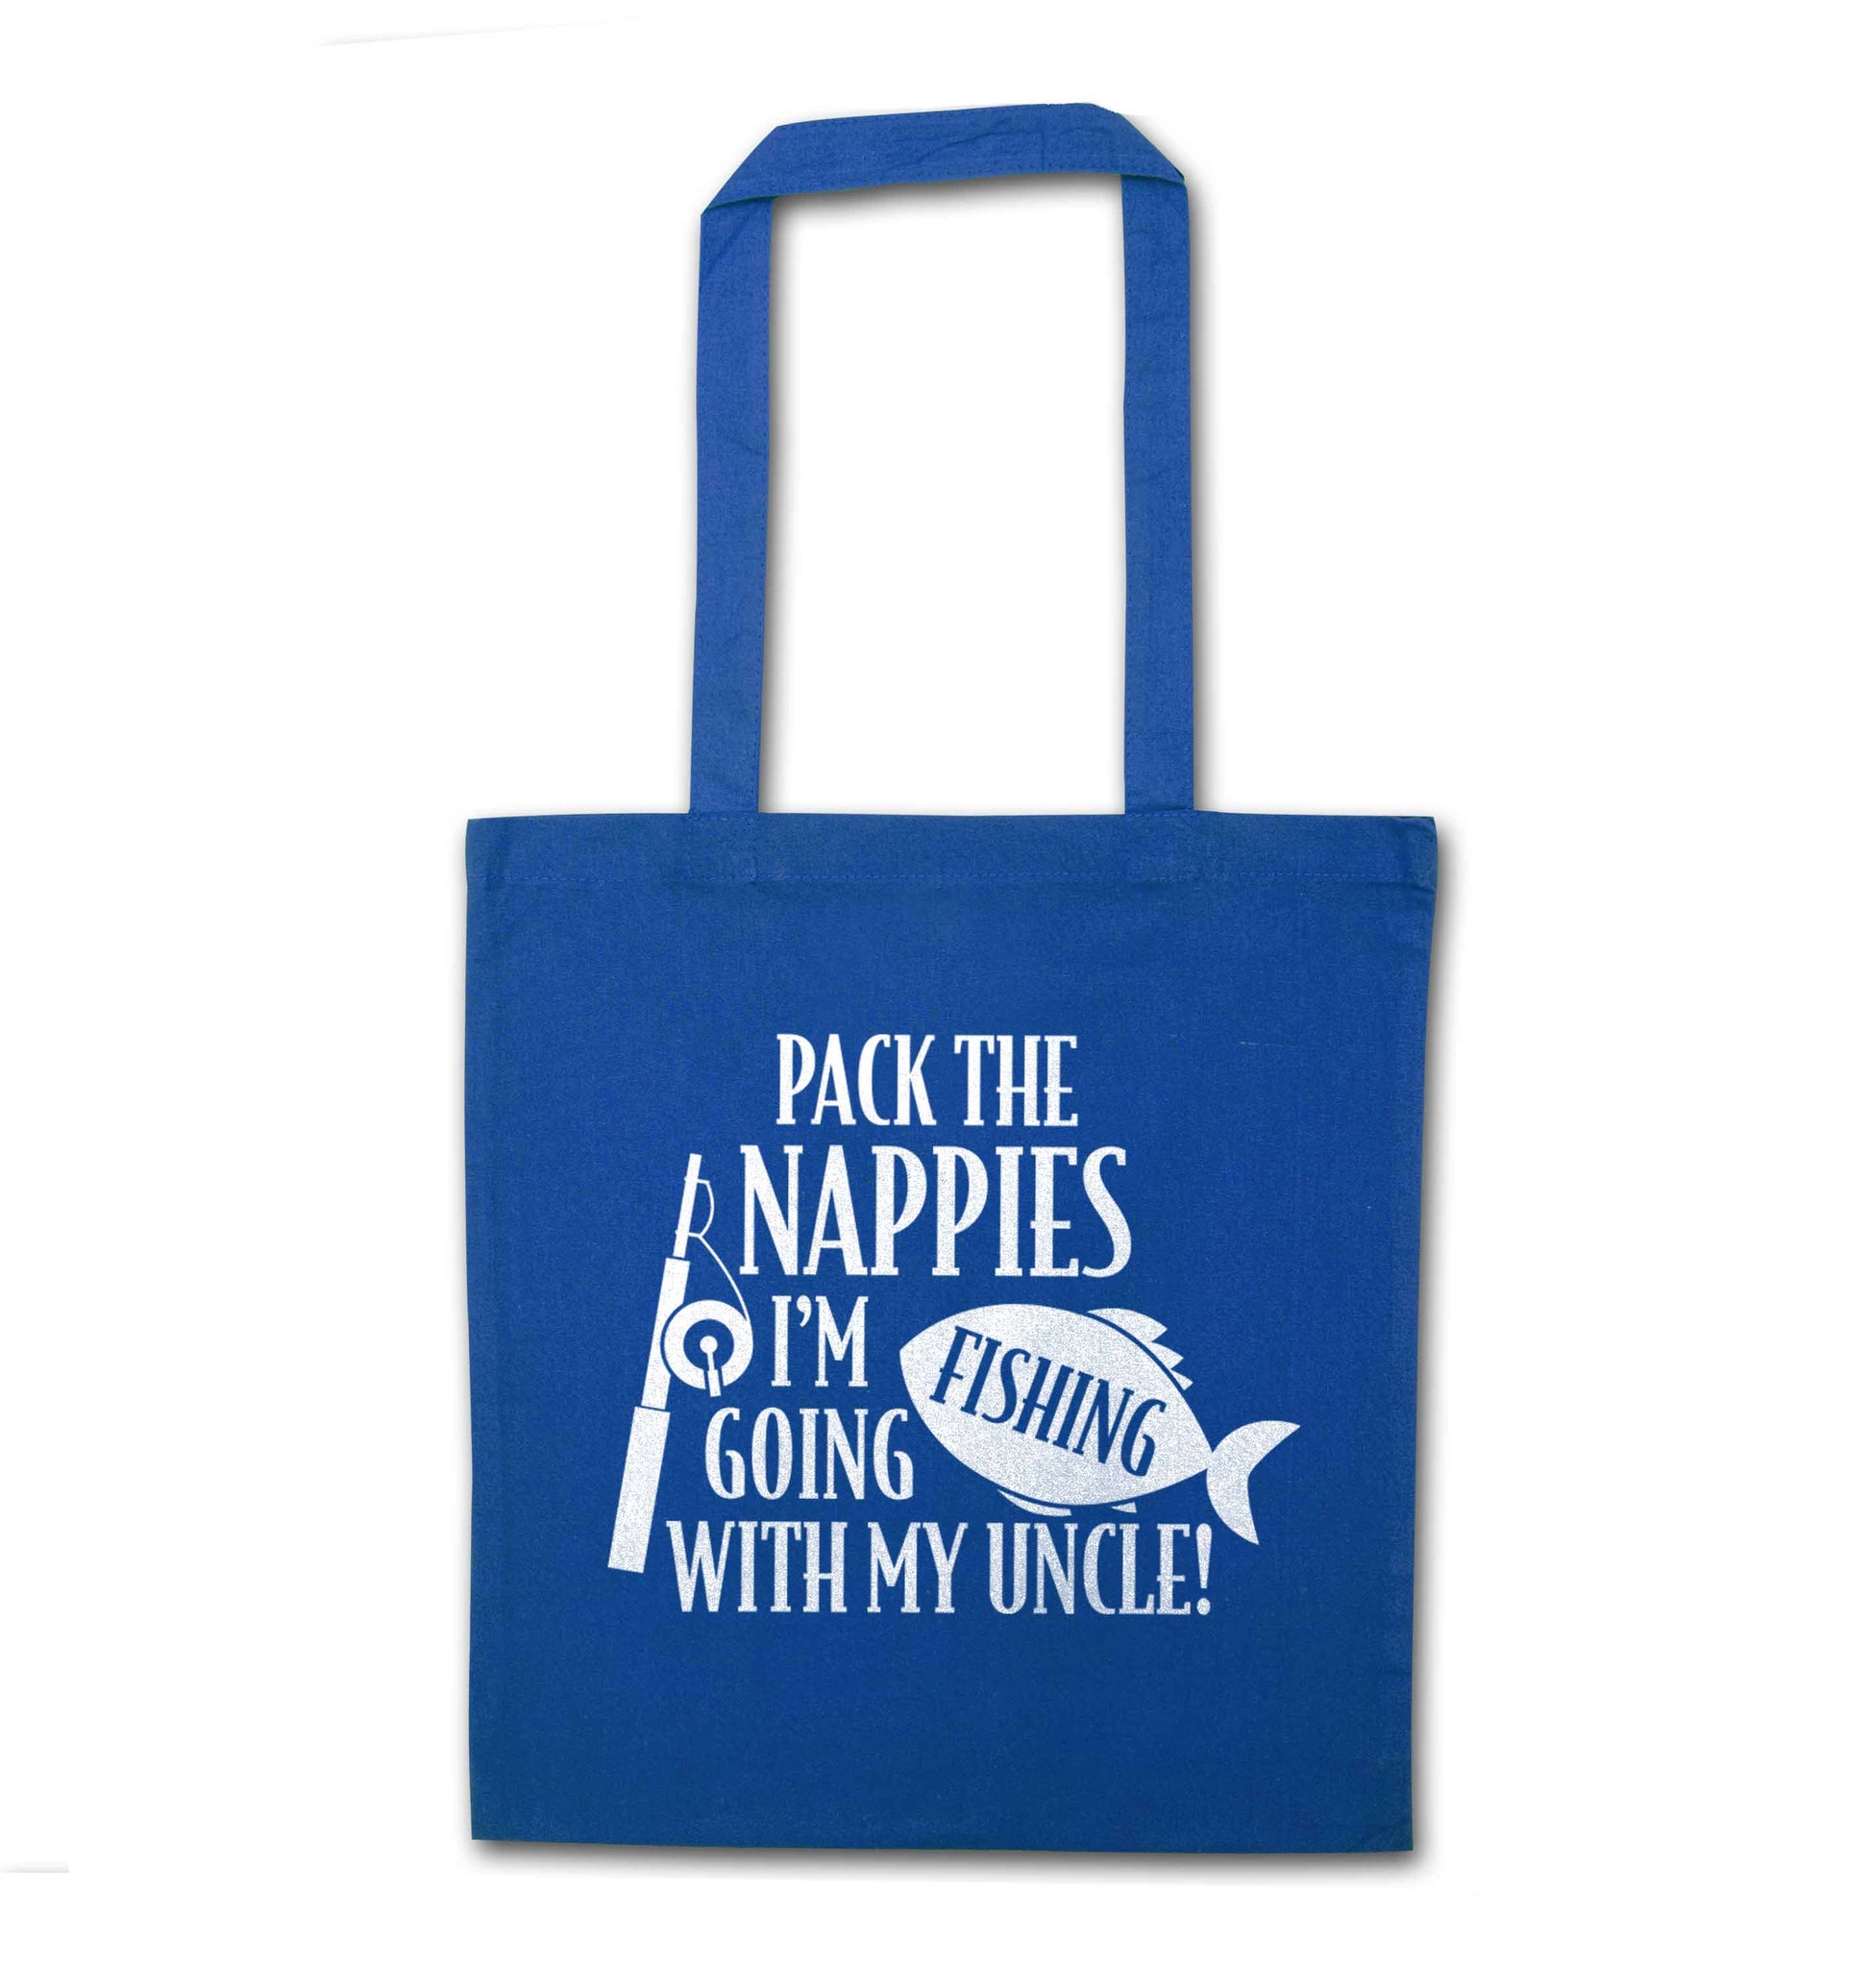 Pack the nappies I'm going fishing my Uncle blue tote bag